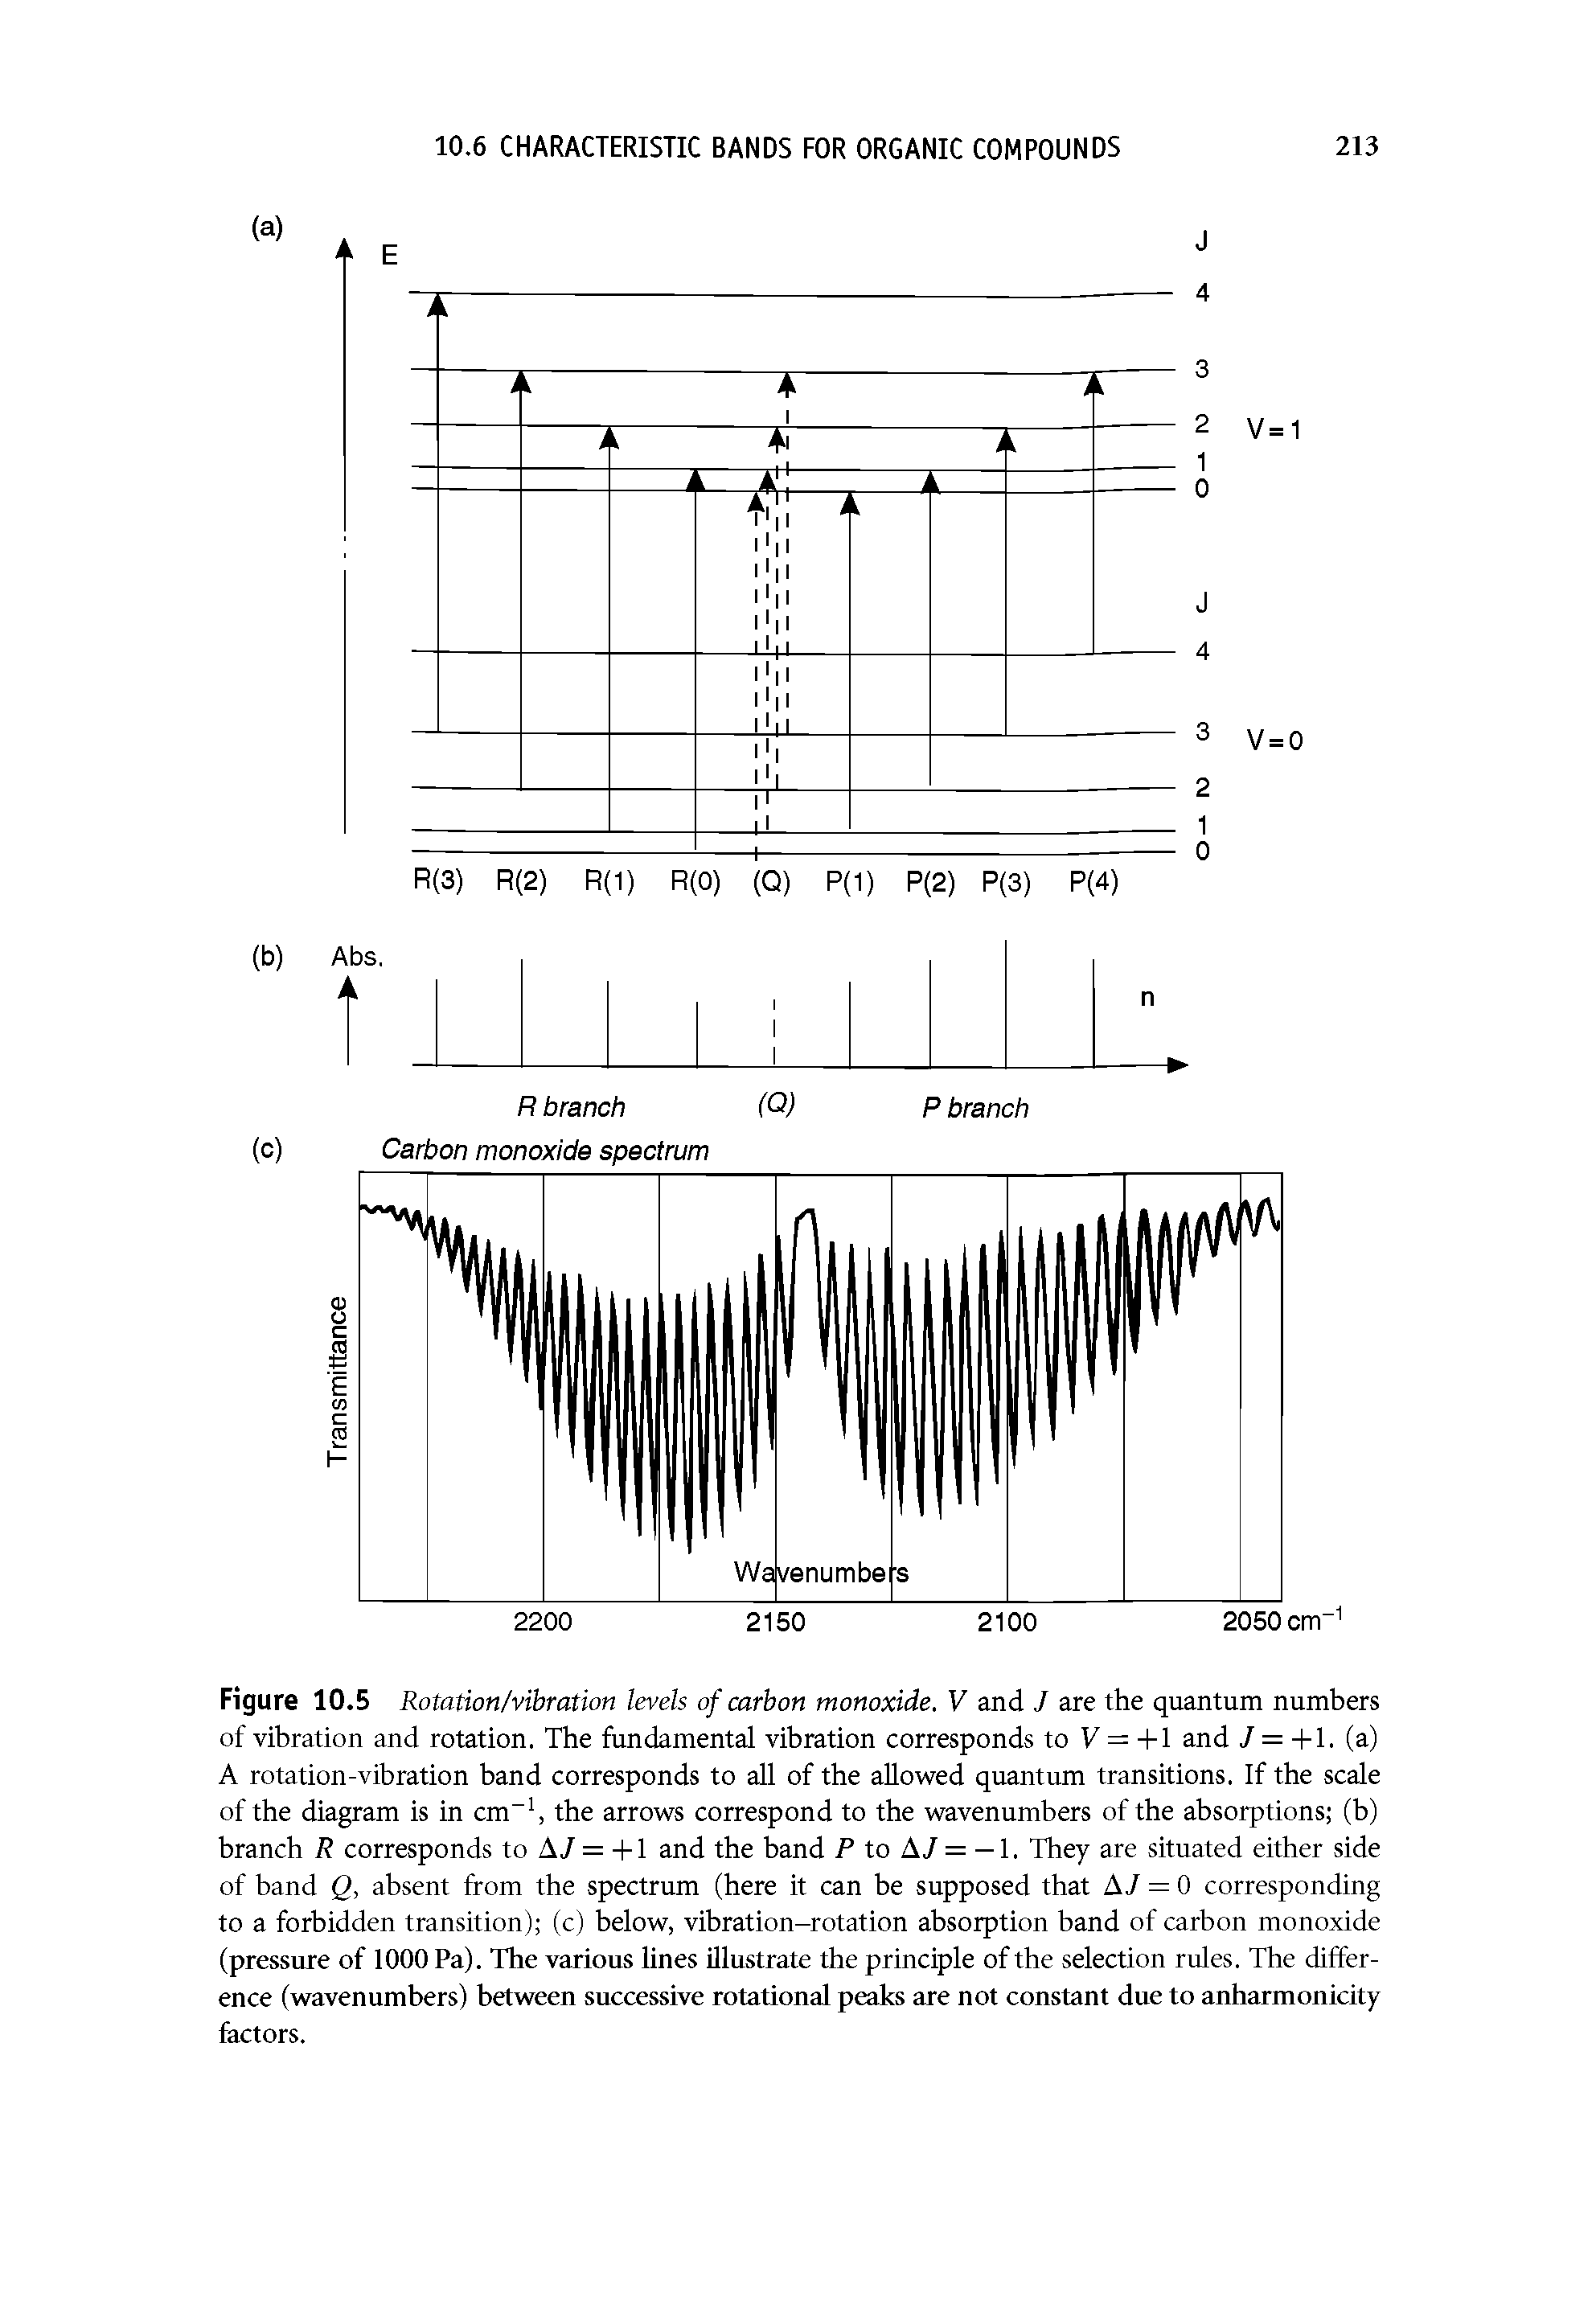 Figure 10.5 Rotation/vibration levels of carbon monoxide. V and J are the quantum numbers of vibration and rotation. The fundamental vibration corresponds to V = +l and 7 = +1. (a) A rotation-vibration band corresponds to all of the allowed quantum transitions. If the scale of the diagram is in cm , the arrows correspond to the wavenumbers of the absorptions (b) branch R corresponds to A7 = +1 and the band P to A7 = — 1. They are situated either side of band Q, absent from the spectrum (here it can be supposed that A7 = 0 corresponding to a forbidden transition) (c) below, vibration-rotation absorption band of carbon monoxide (pressure of 1000 Pa). The various lines illustrate the principle of the selection rules. The difference (wavenumbers) between successive rotational peaks are not constant due to anharmonicity factors.